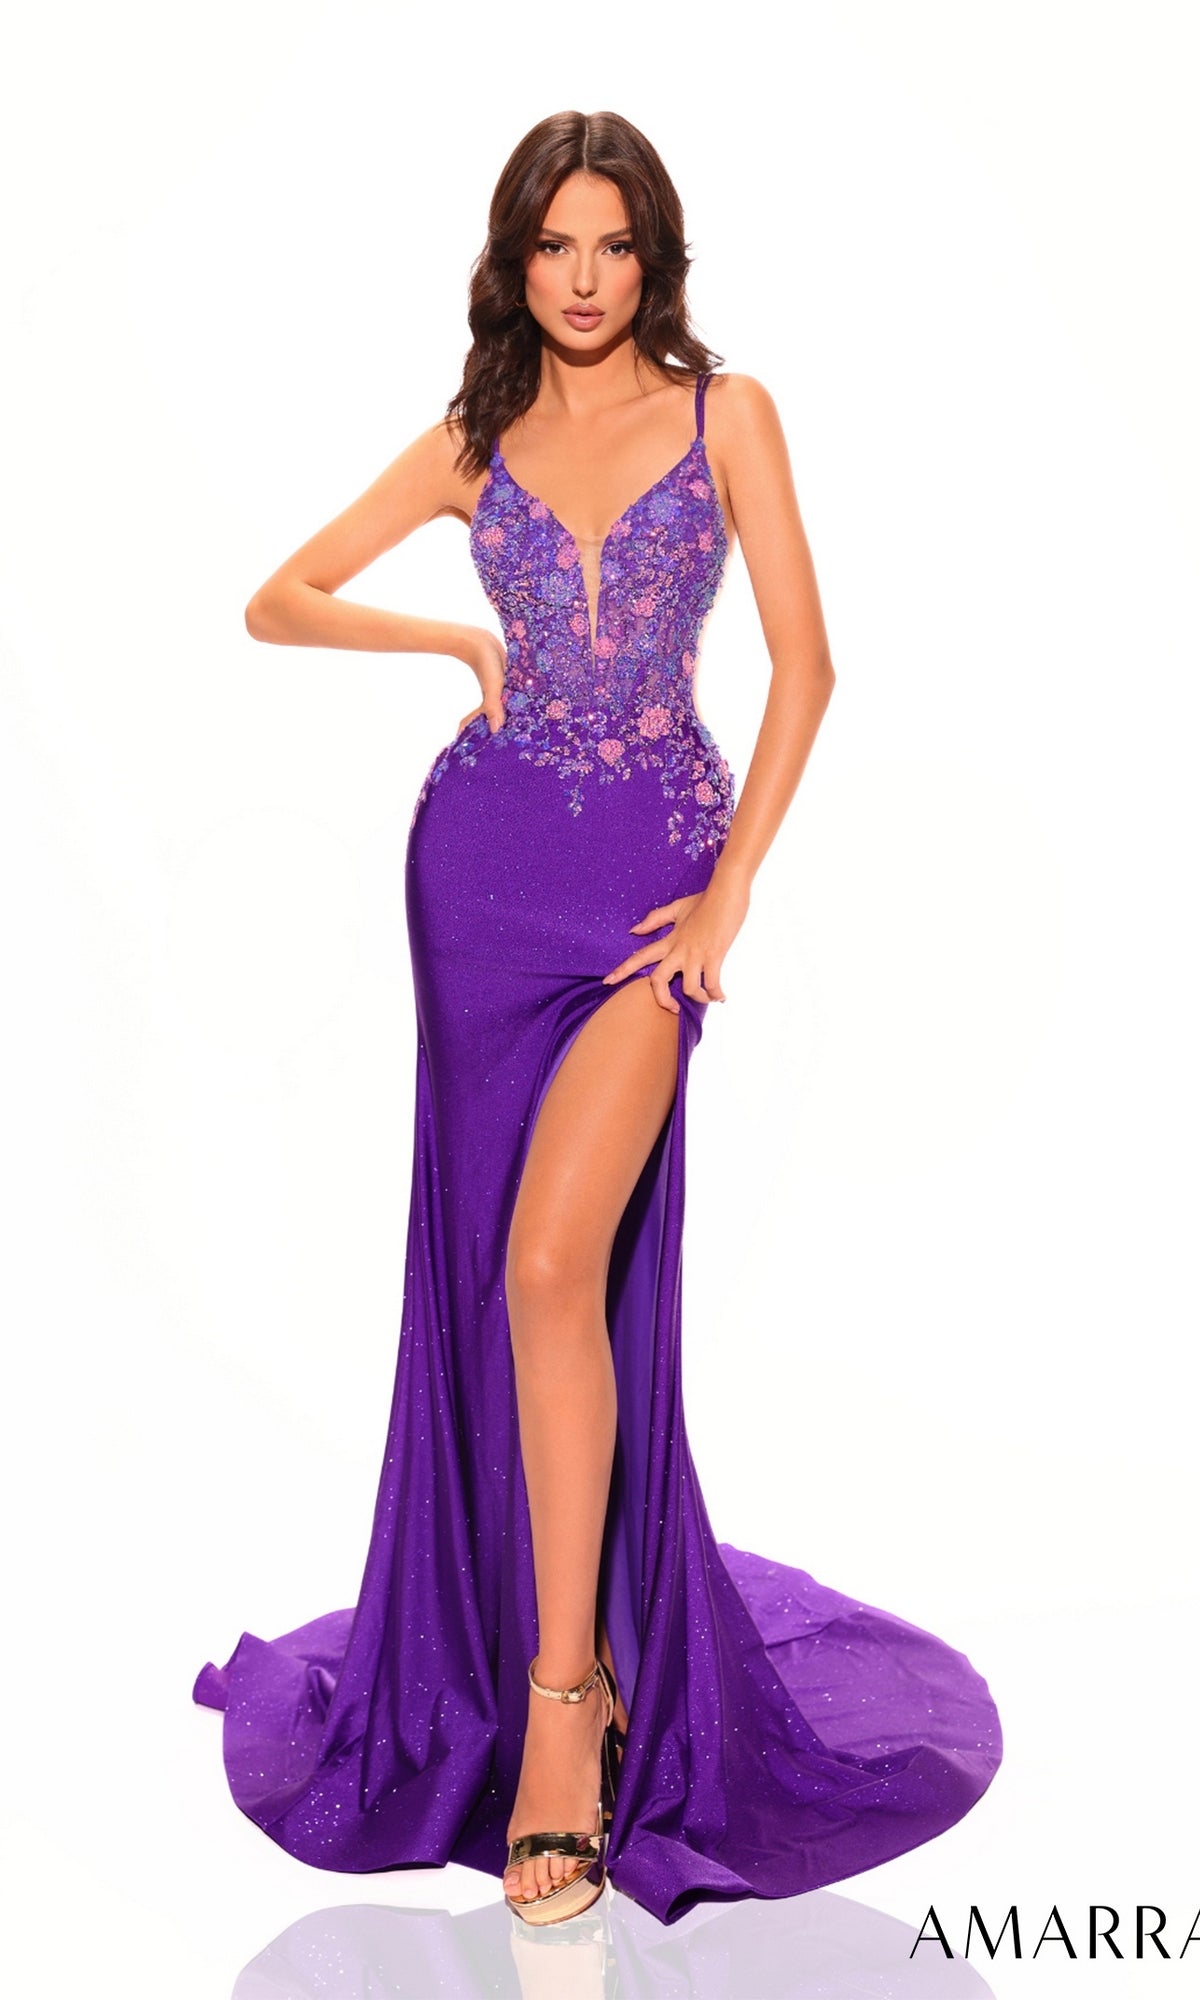 Strappy-Back Amarra Tight Long Prom Dress 88747